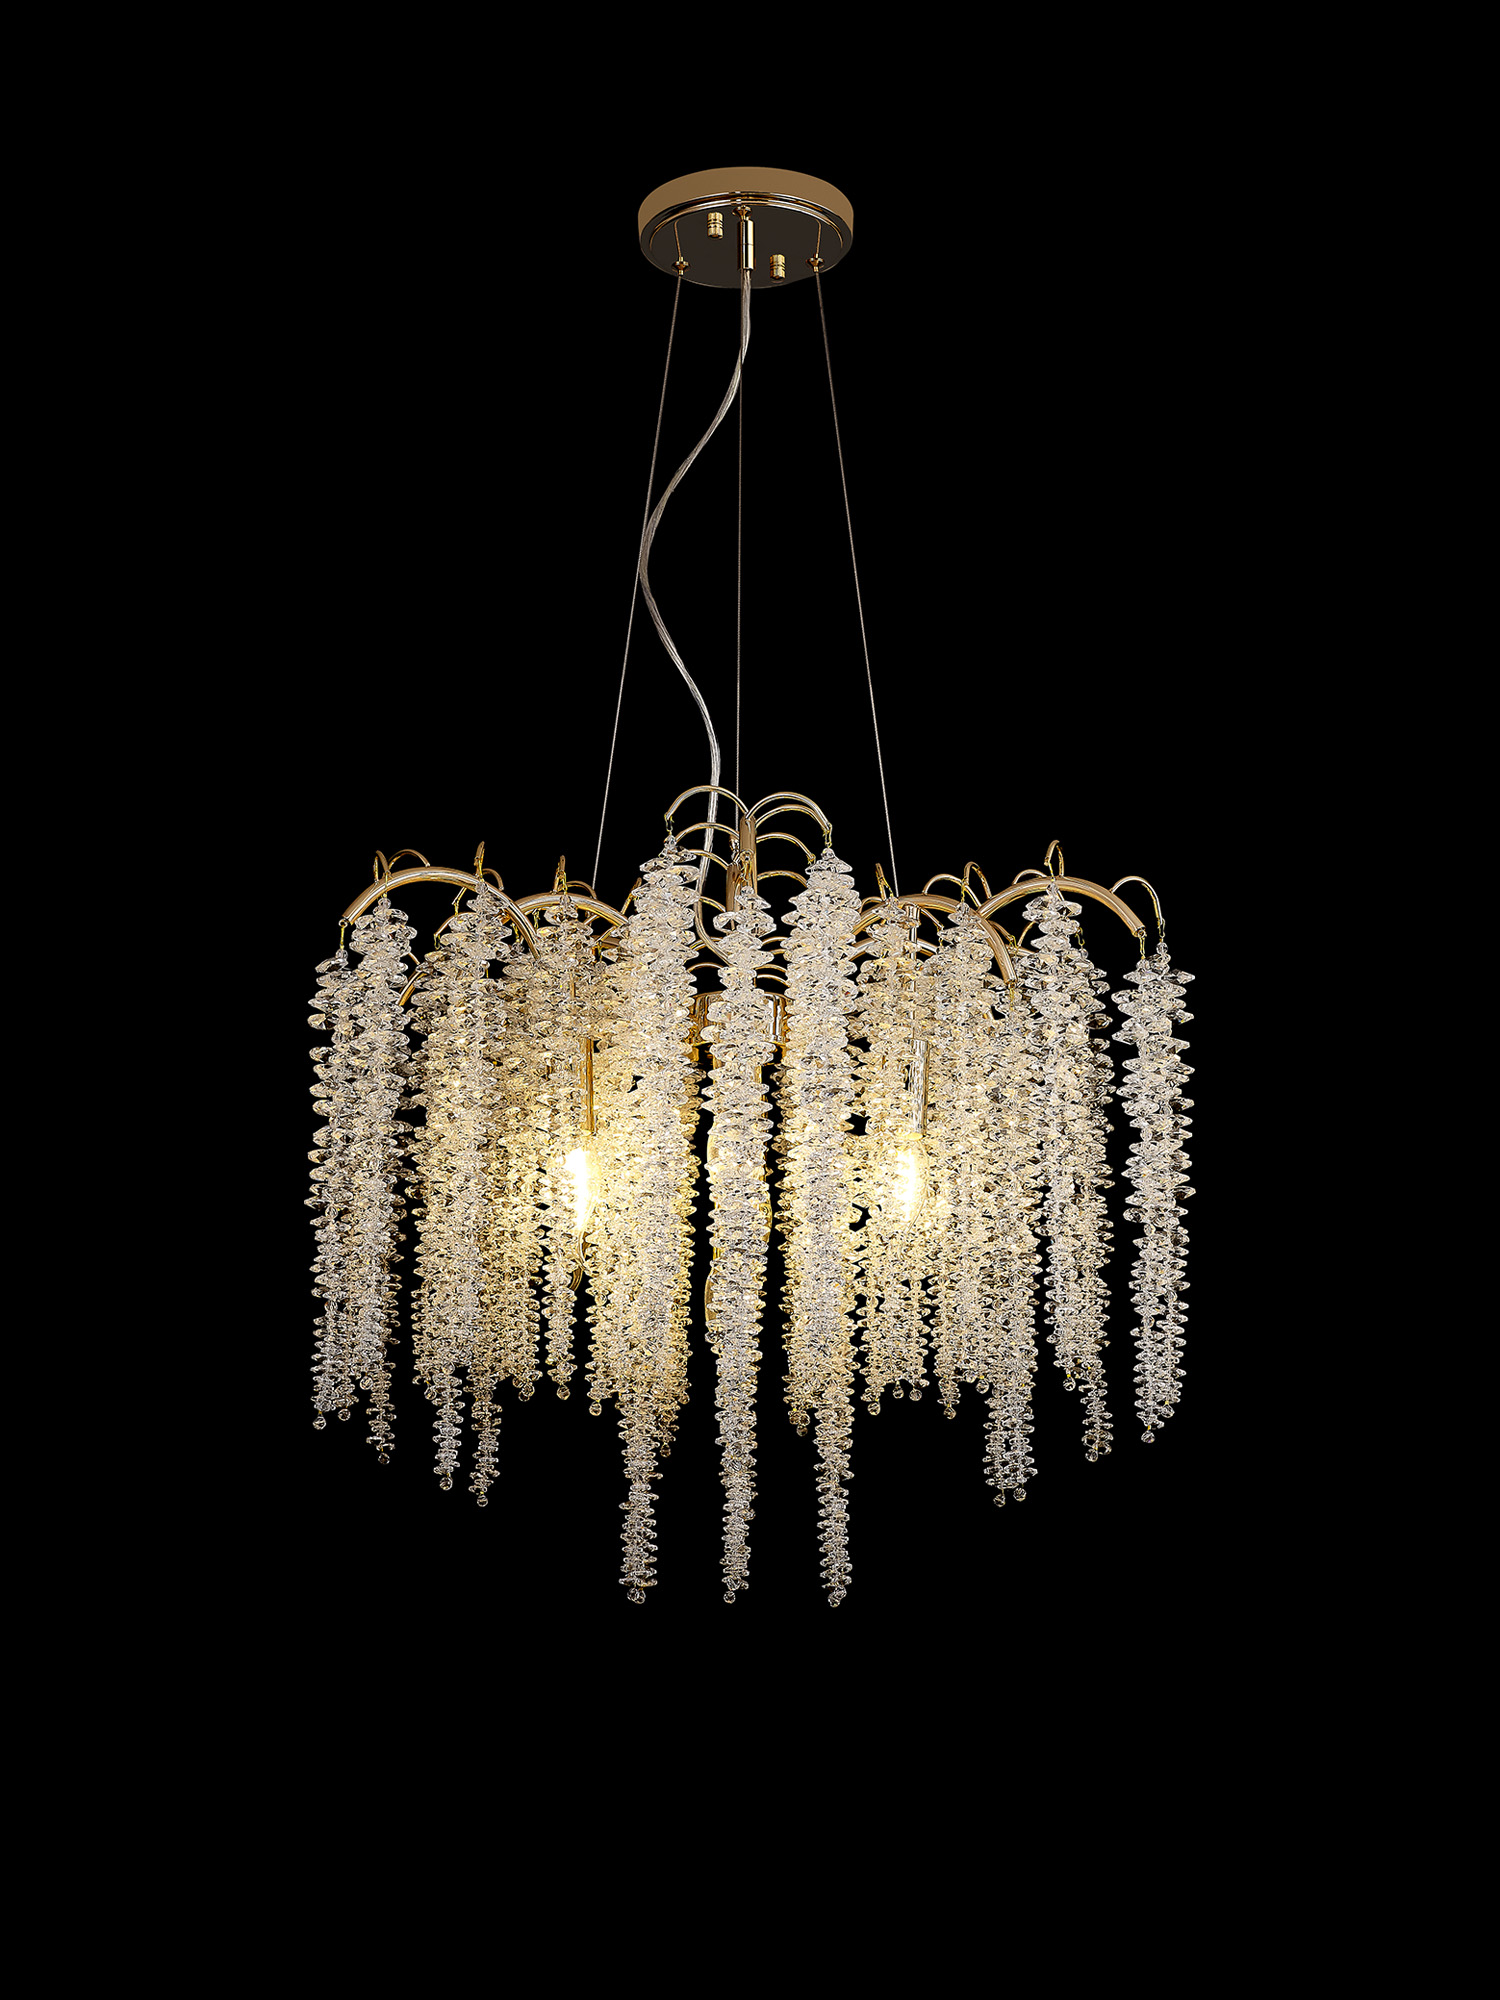 Wisteria French Gold Crystal Ceiling Lights Diyas Multi Arm Crystal Fittings